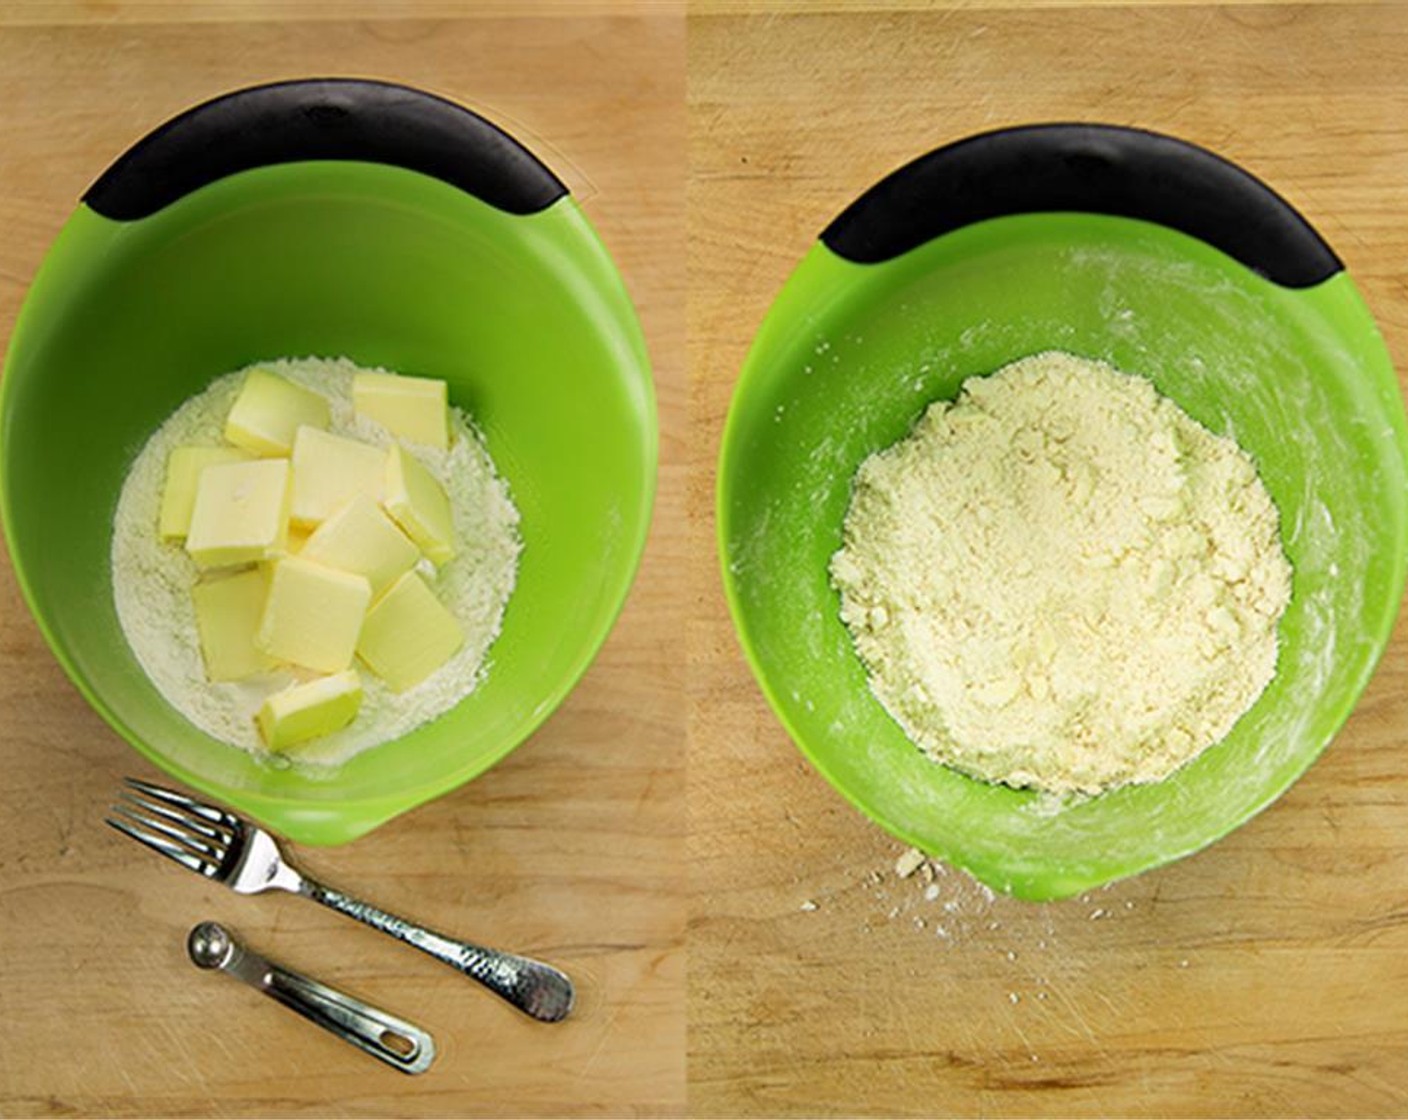 step 2 For the pie crust, in a large bowl, combine the All-Purpose Flour (2 cups) and Salt (1/4 tsp). Add the Unsalted Butter (2/3 cup) and work into the dough with a fork until crumbly.